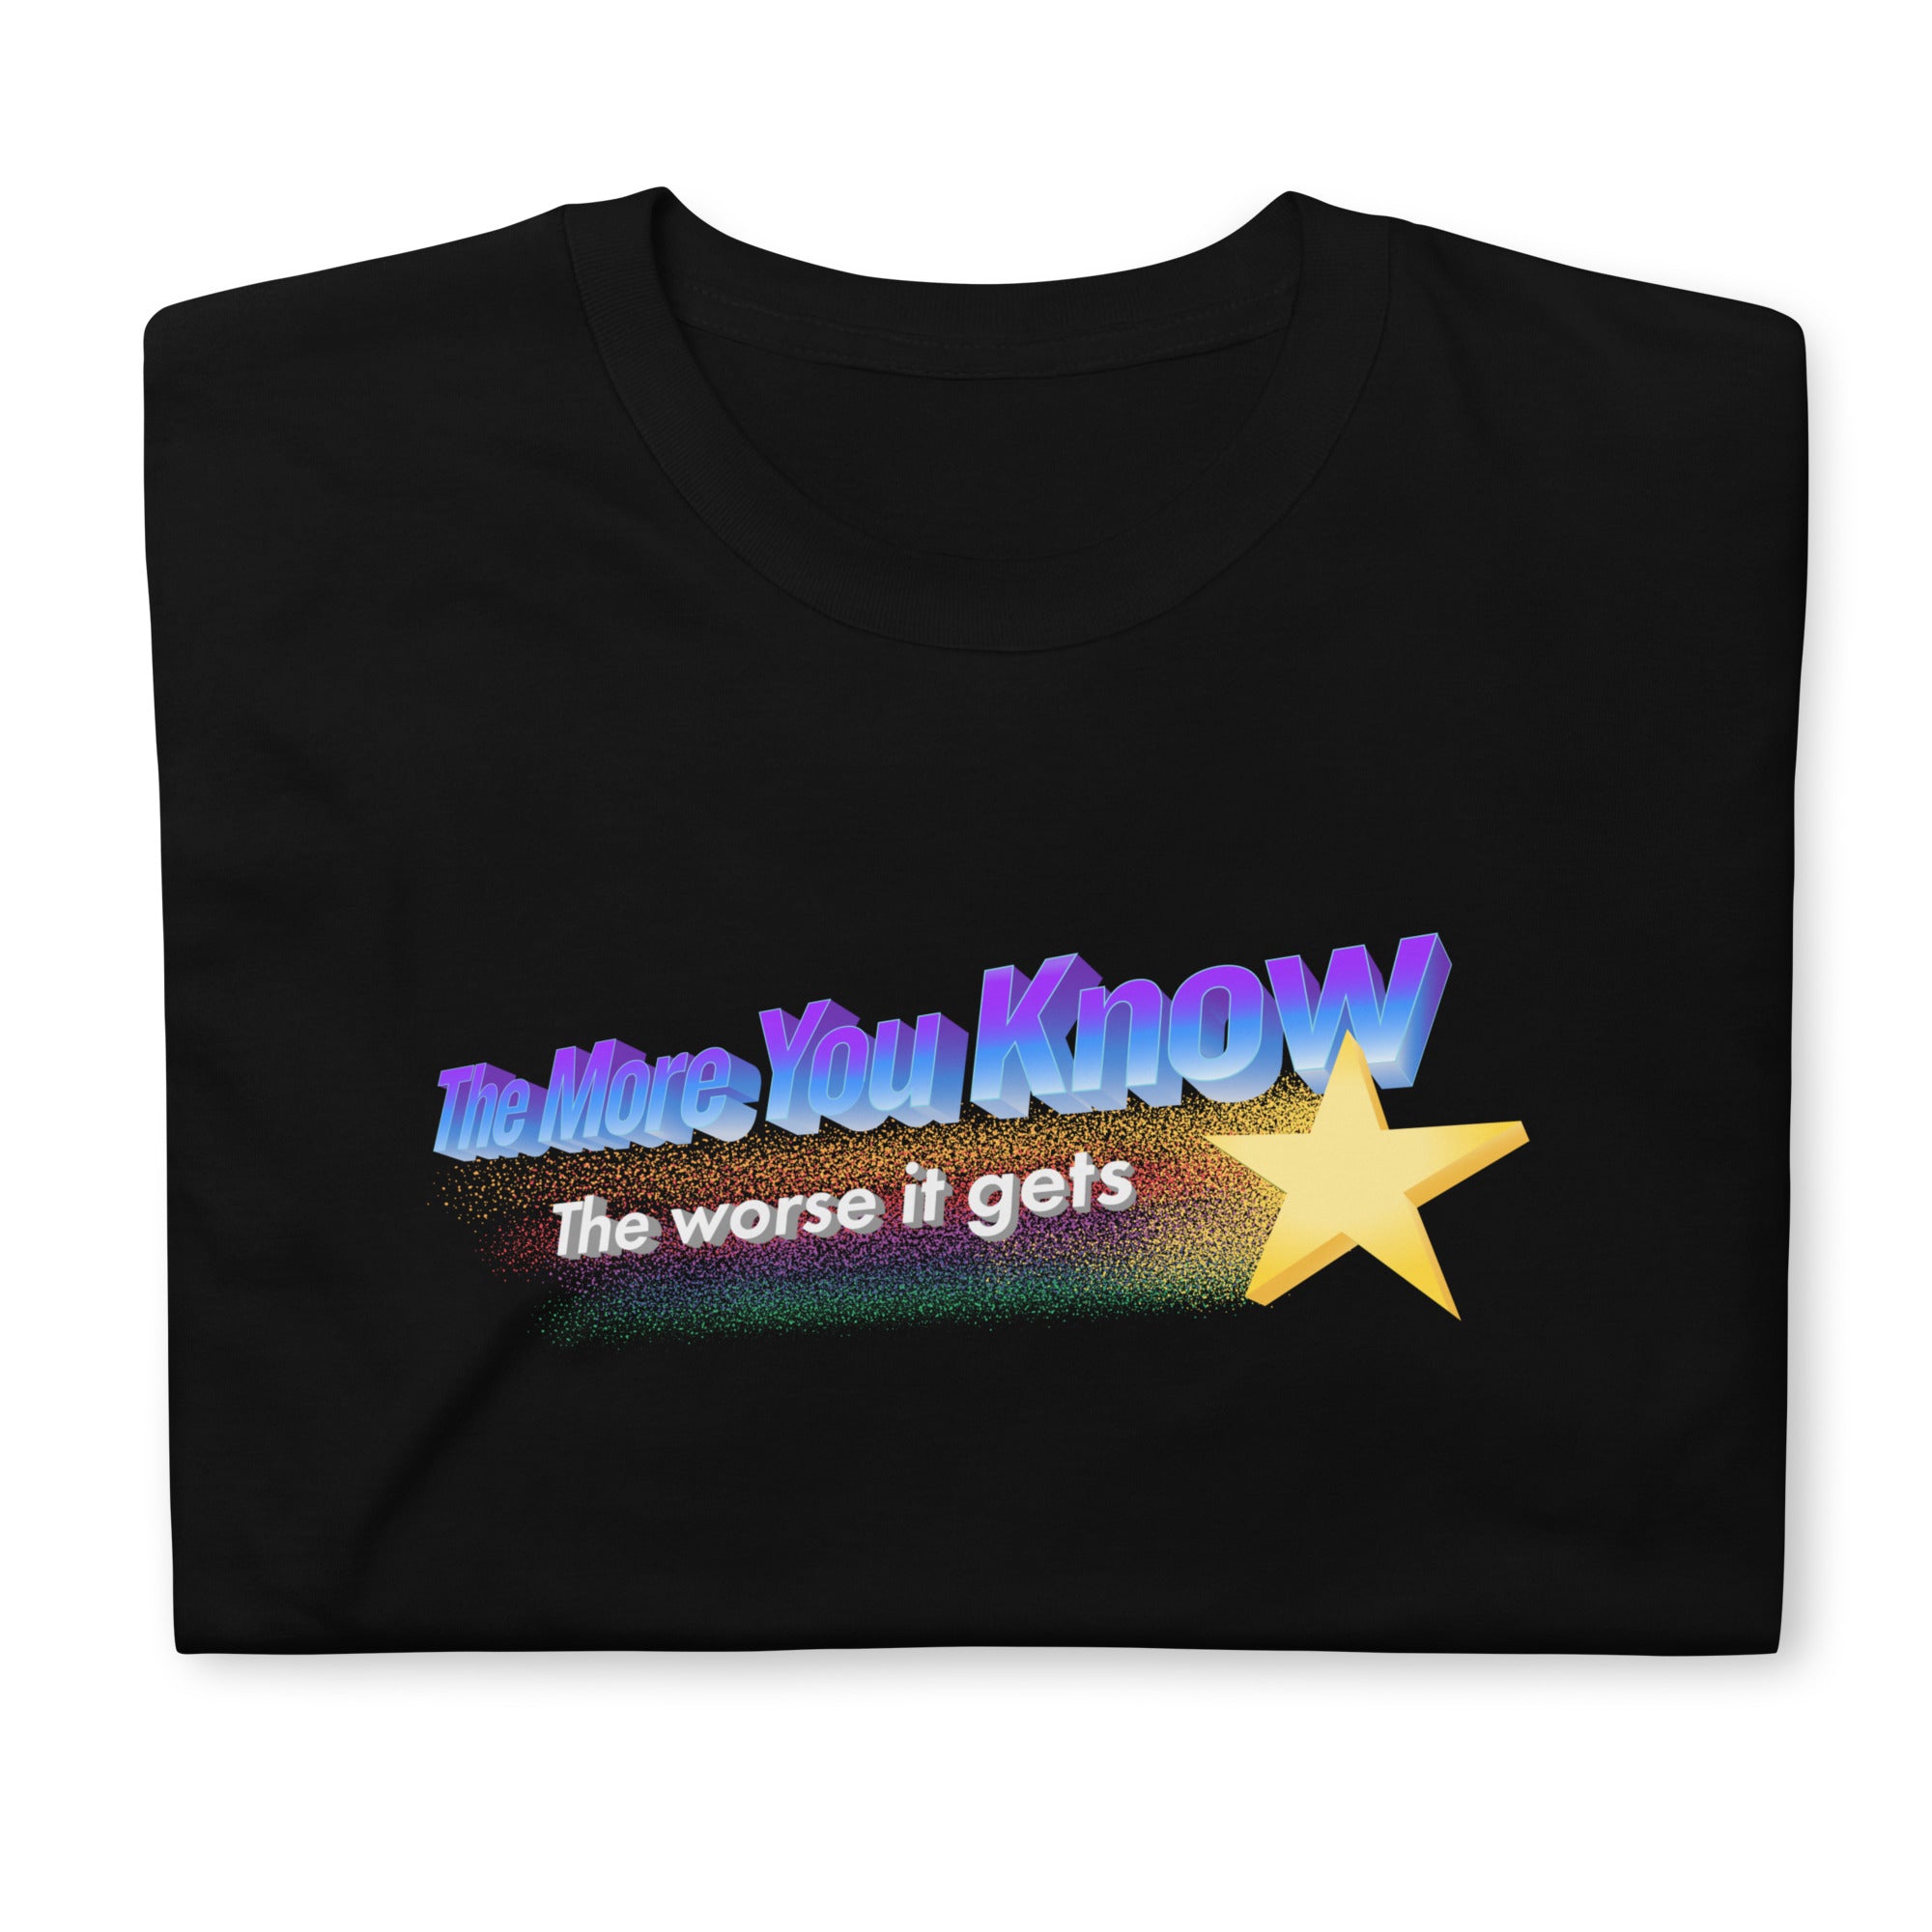 The More You Know The Worse It Gets Short-Sleeve Unisex T-Shirt